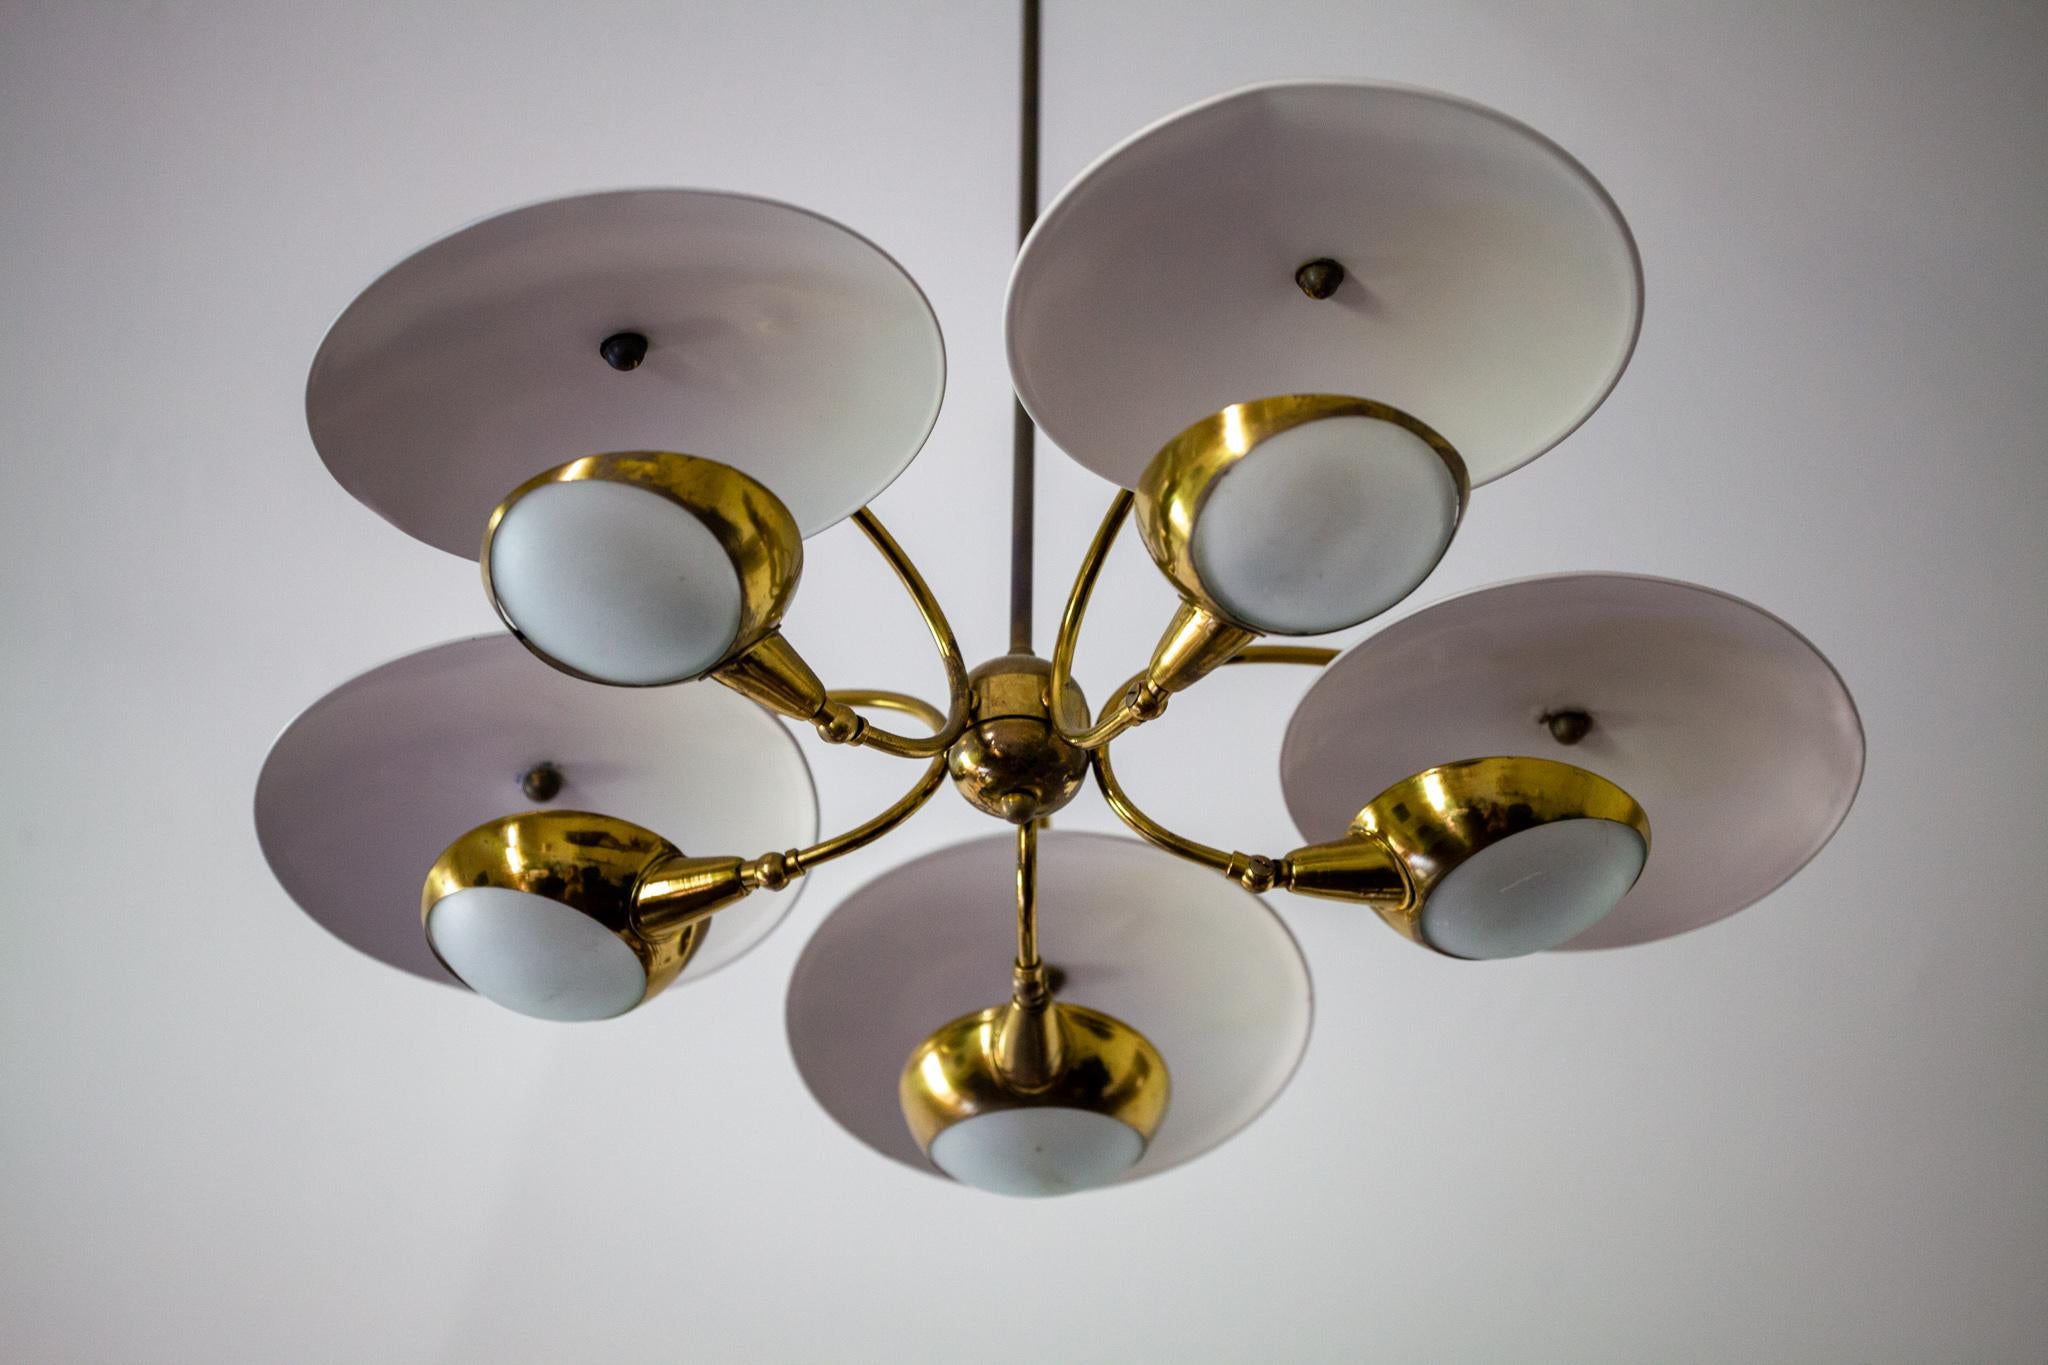 Brass and painted ivory aluminum shades. This whimsical 5-light chandelier is stem mounted. User may cut the stem if a shorter length is desired. Omits a beautiful warm-toned reflective glow from the off-white shades and frosted glass.